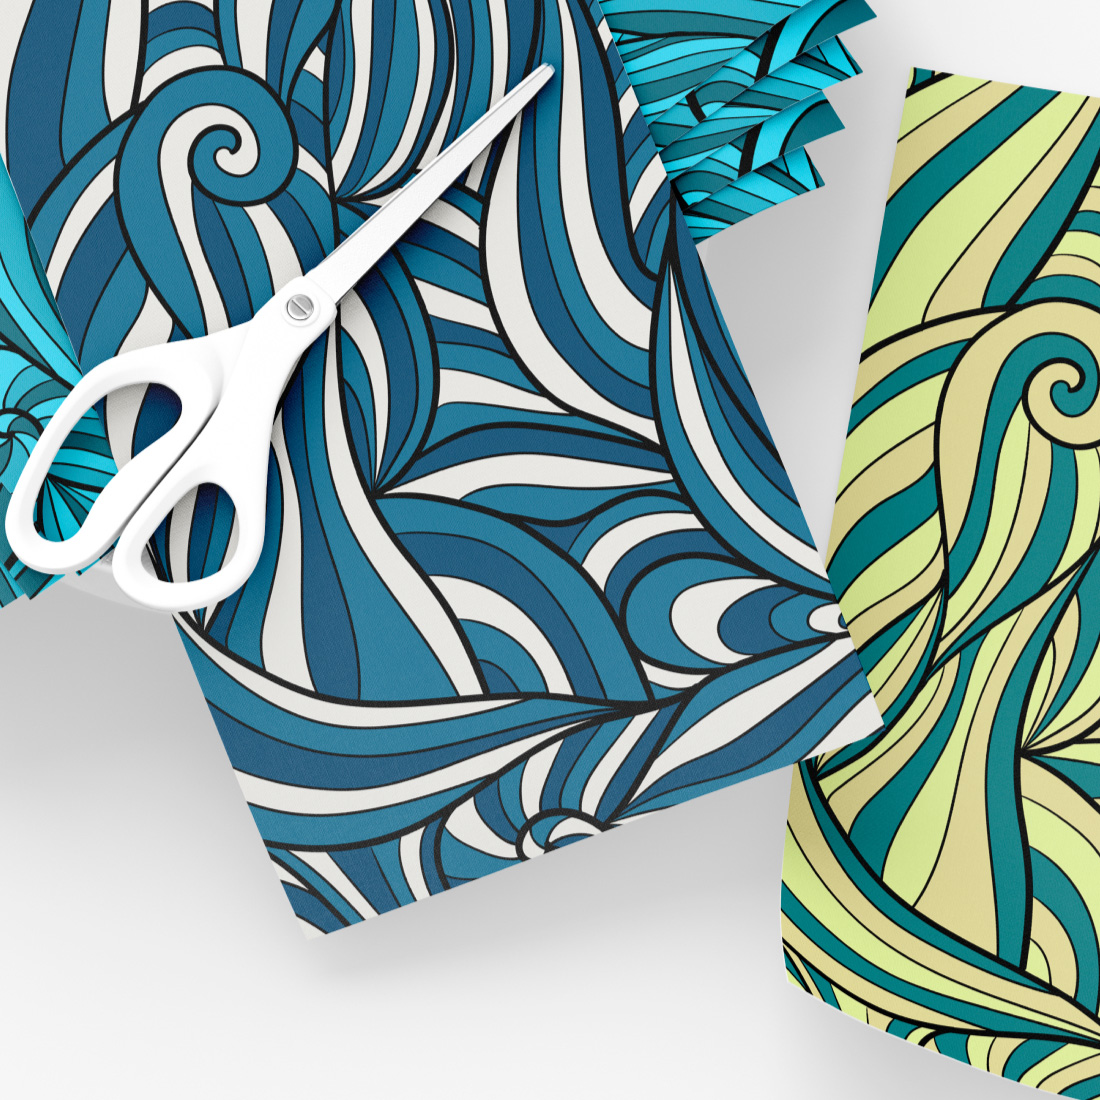 Abstract Colorful Patterns with Repeating Stripes and Waves for printing.